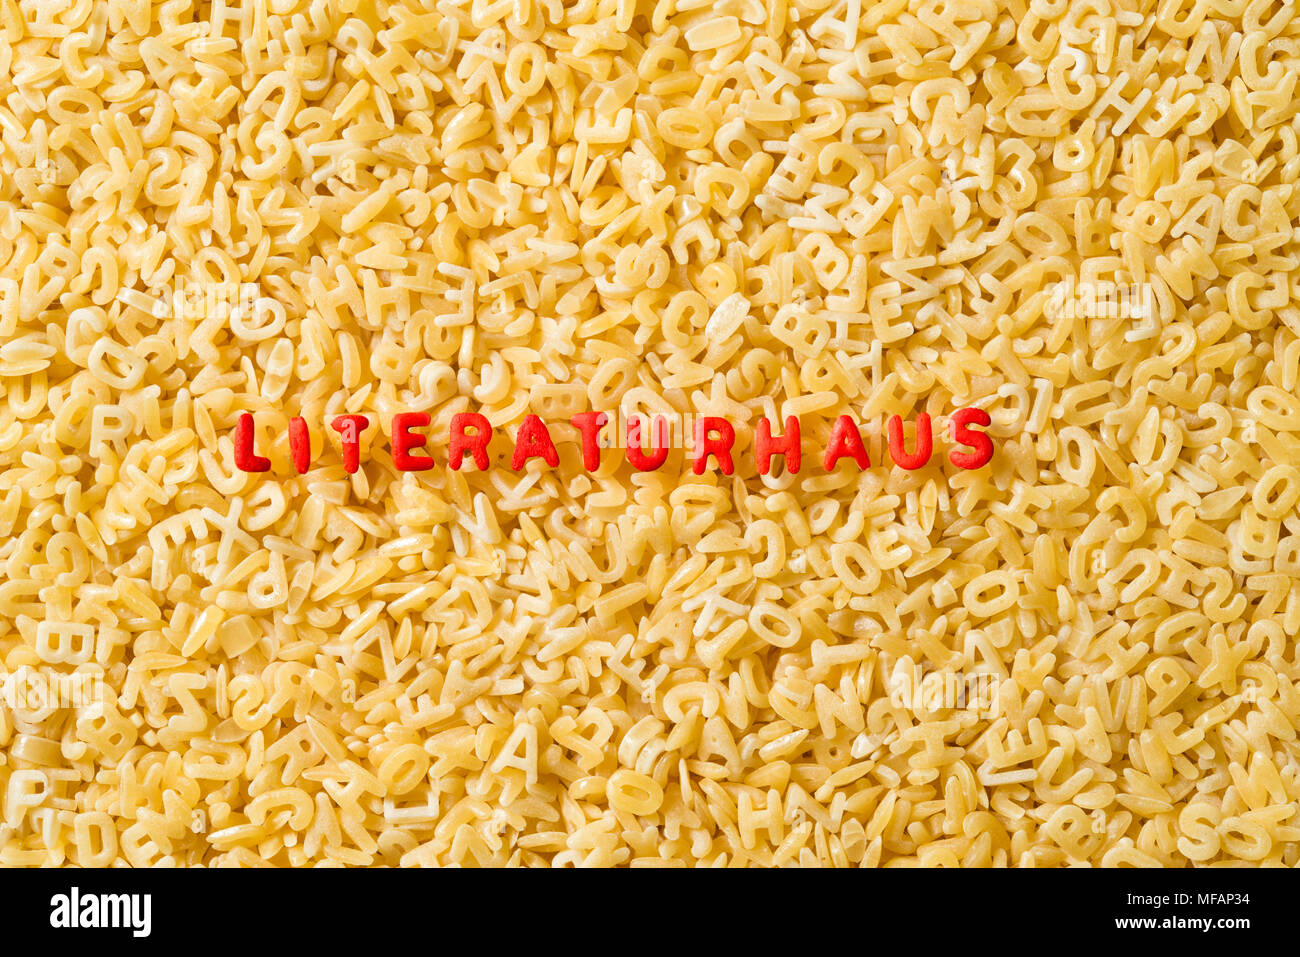 The german word 'LITERATURHAUS' is spelled with red colored abc pasta letters. The background is made from uncooked natural abc pasta letters. Stock Photo